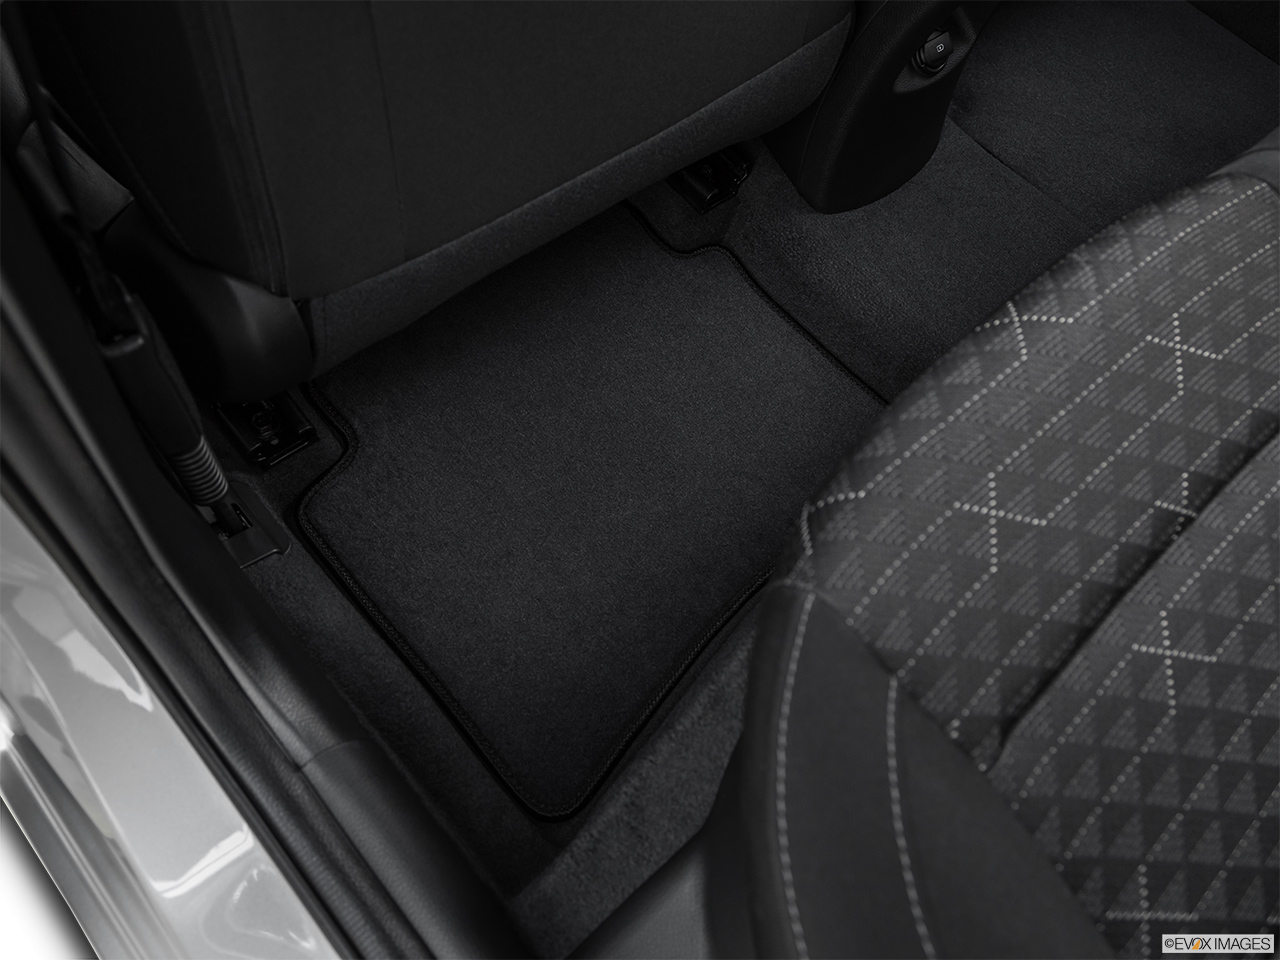 2020 Kia Rio 5-door S Rear driver's side floor mat. Mid-seat level from outside looking in. 